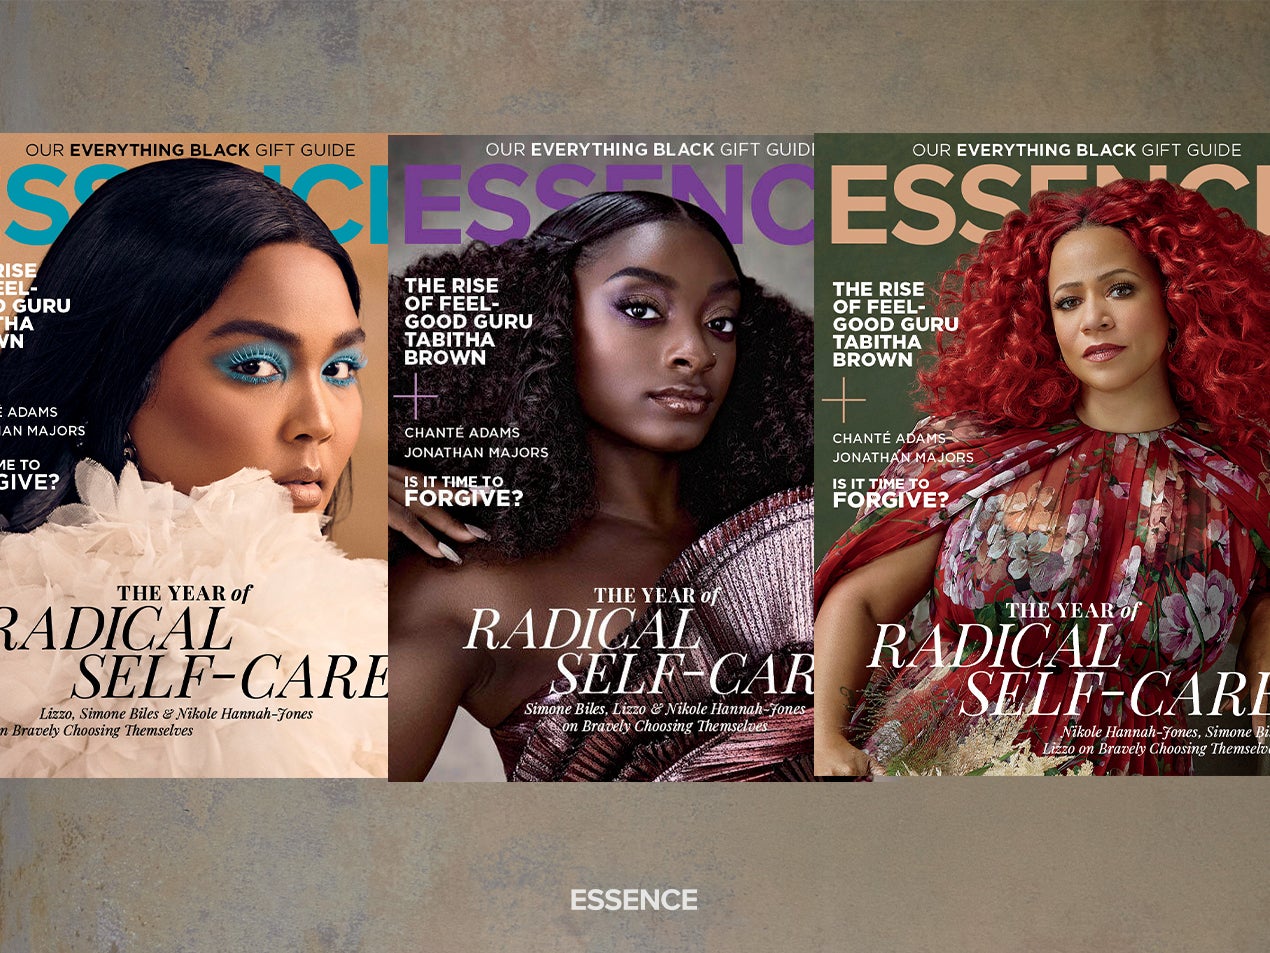 ESSENCE’s Holiday Split-Cover Issue Features Simone Biles, Lizzo, and Nikole Hannah-Jones